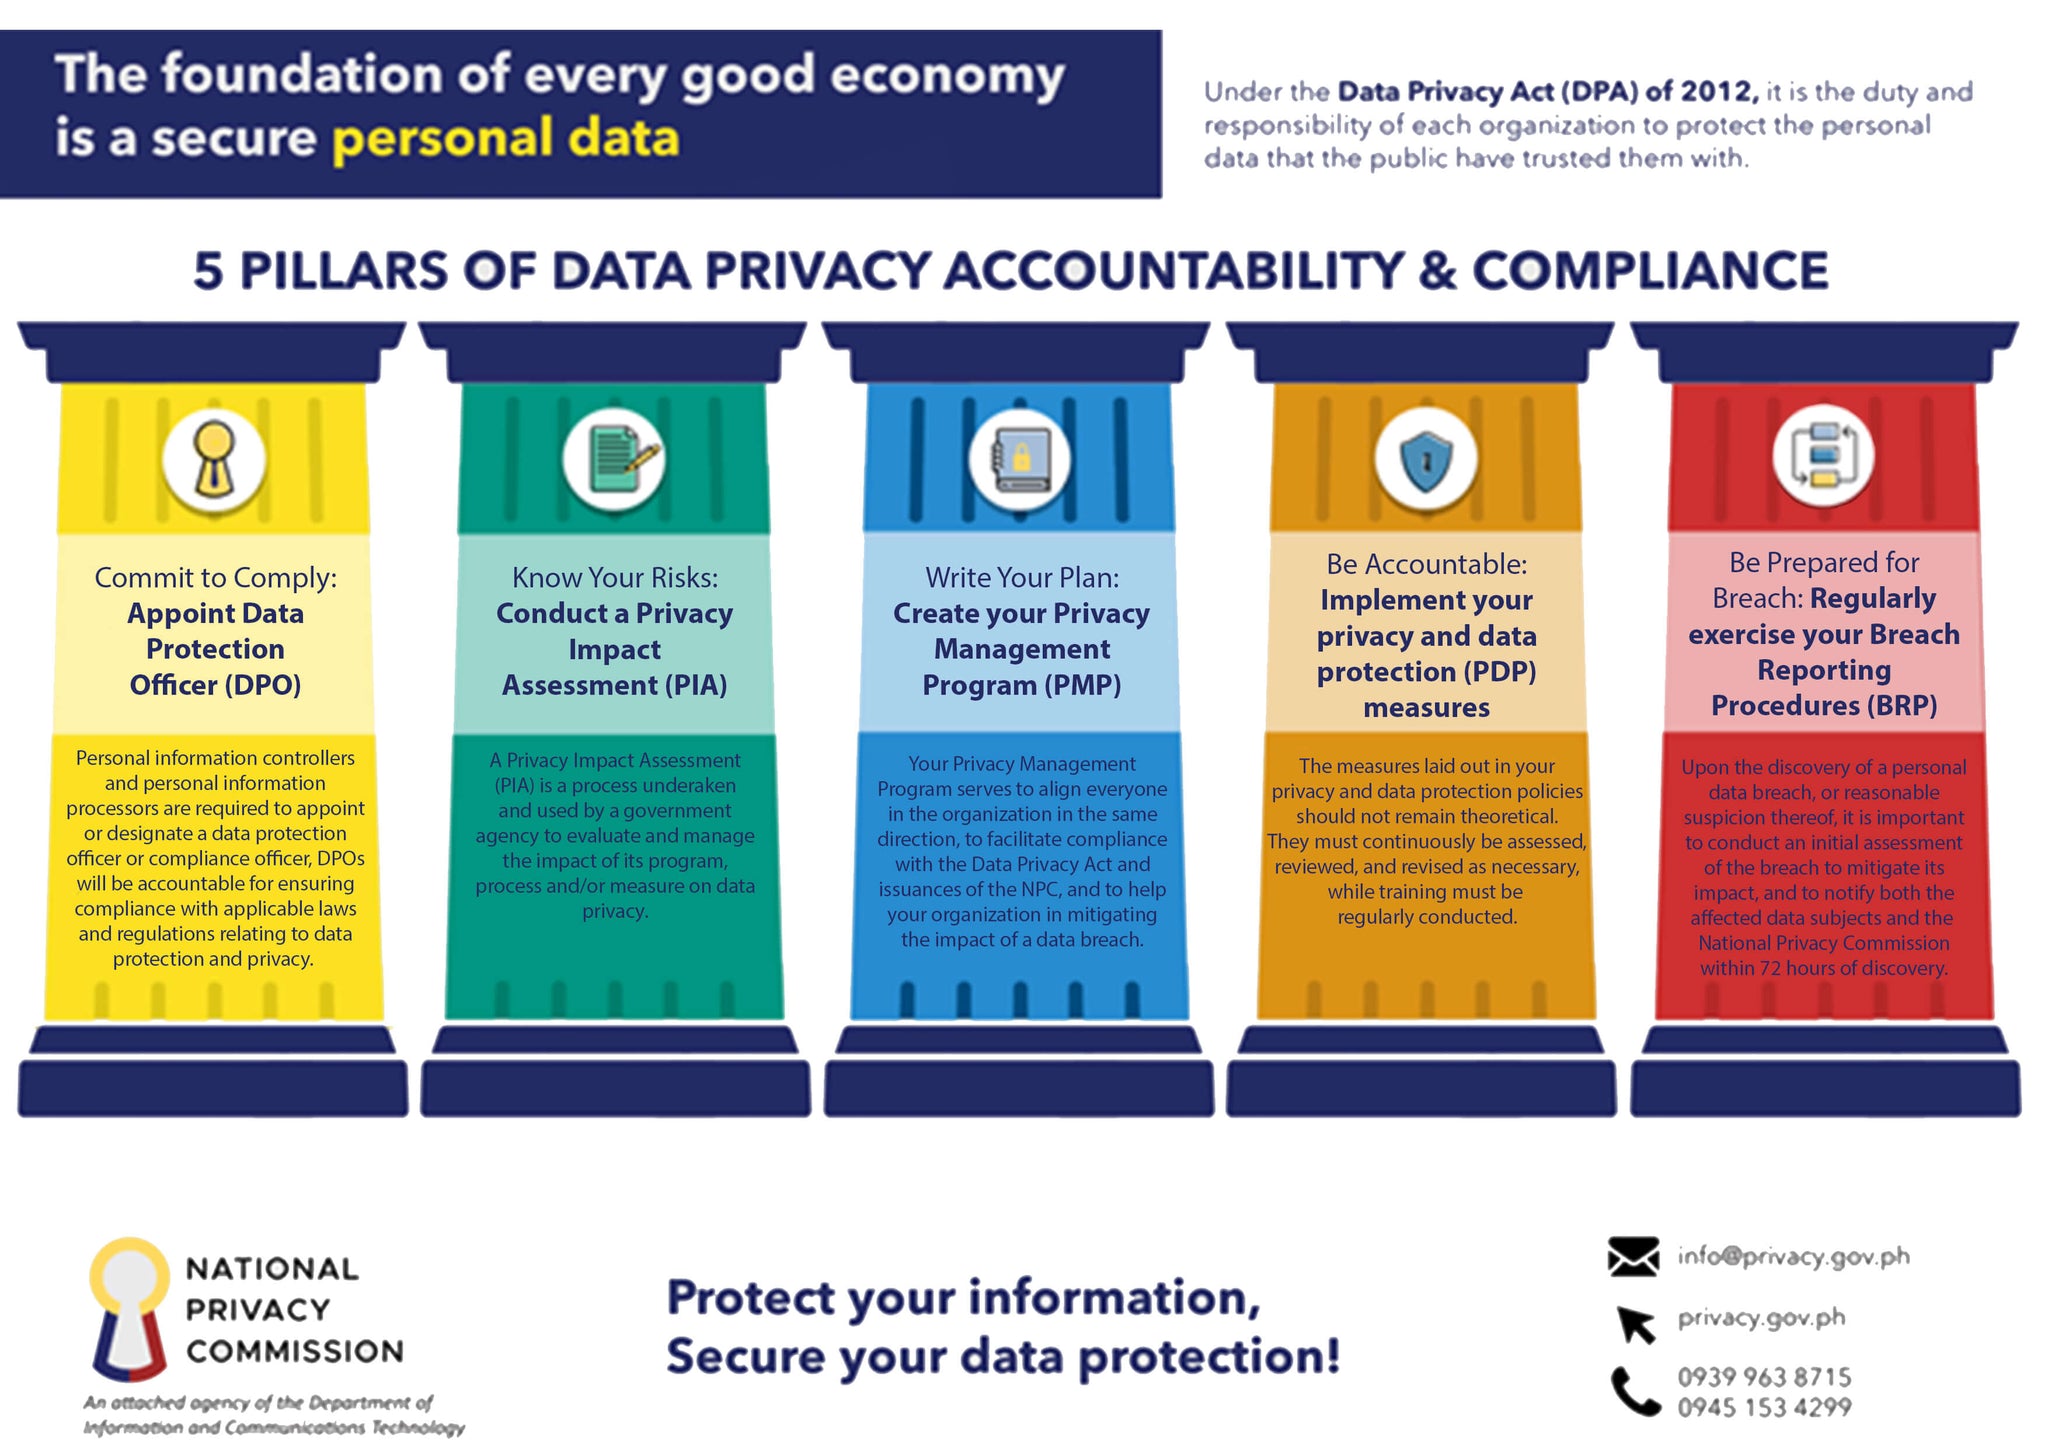 How To Comply With Data Privacy Act